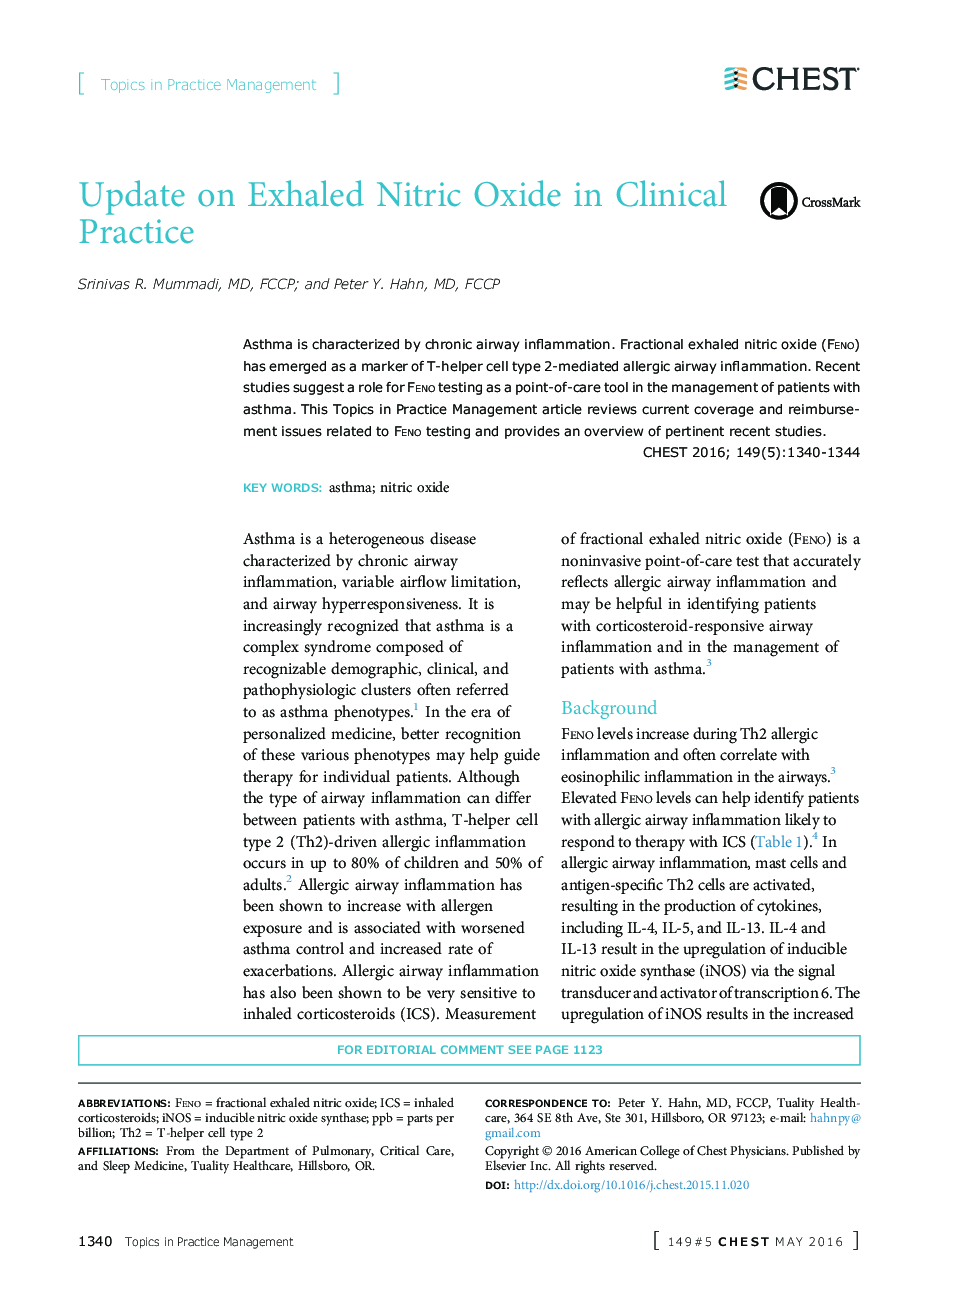 Update on Exhaled Nitric Oxide in Clinical Practice